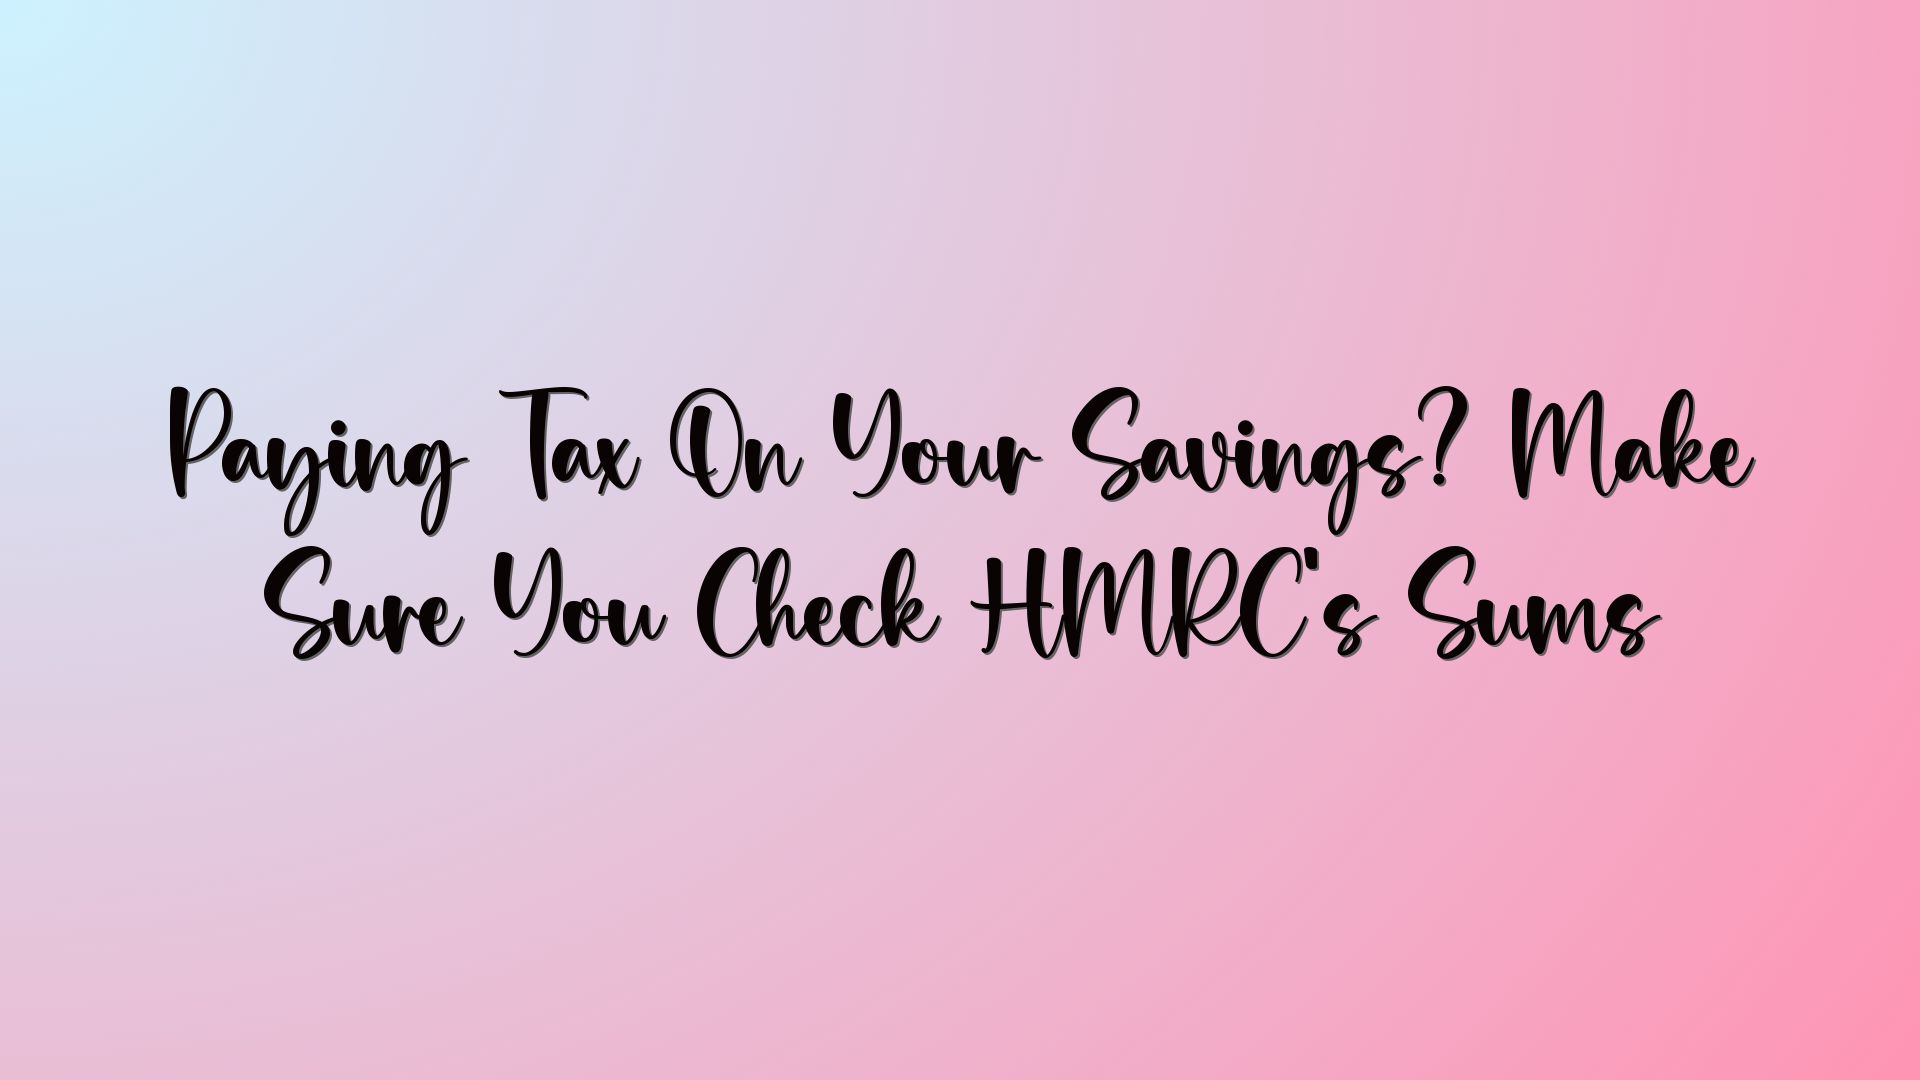 Paying Tax On Your Savings? Make Sure You Check HMRC’s Sums